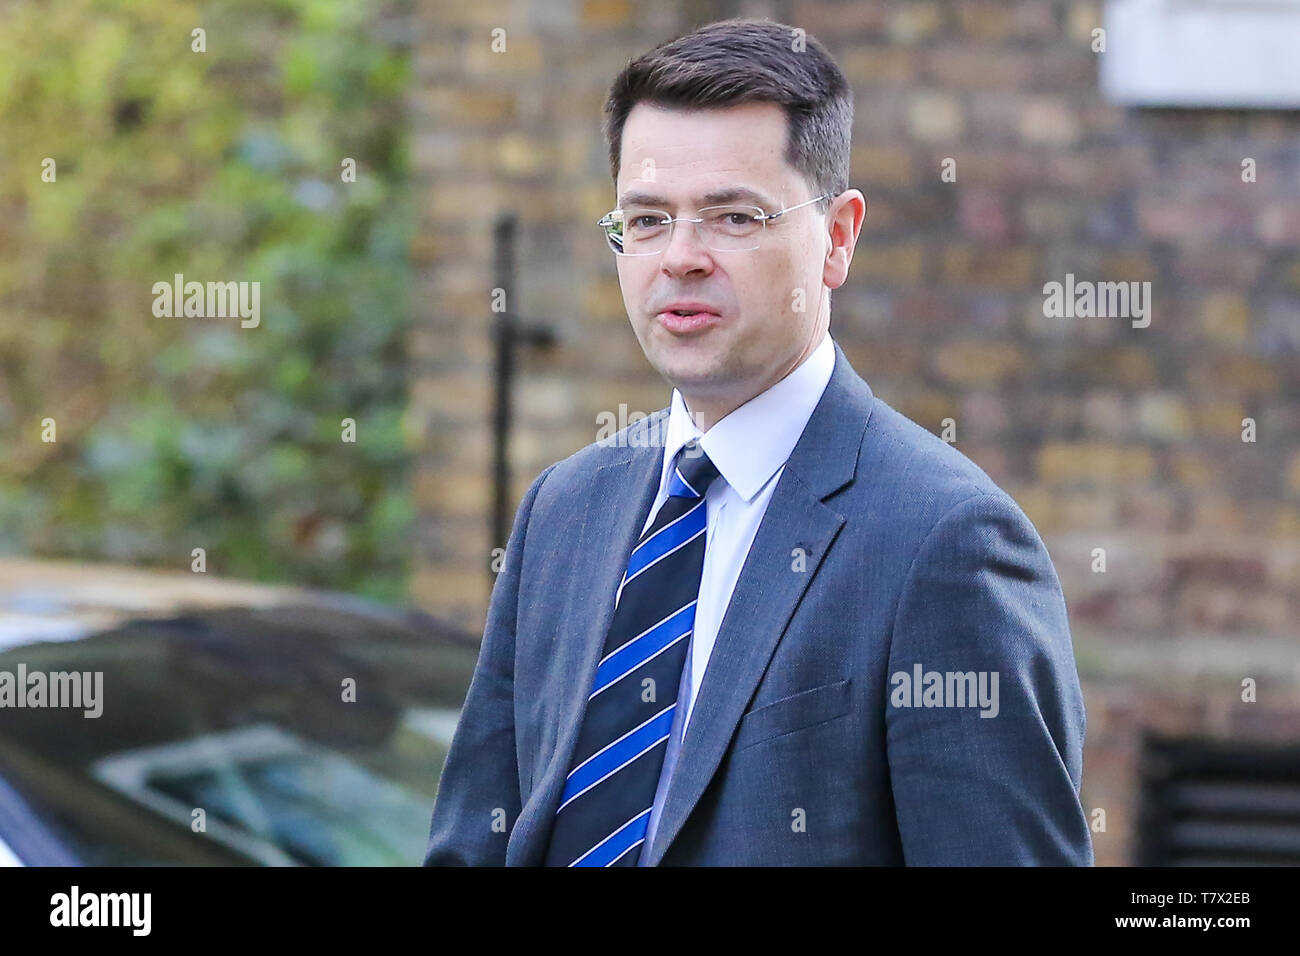 Communities Secretary James Brokenshire seen in Downing Street. On 14 June 2017, a fire broke out in the 24-storey Grenfell Tower block of flats in North Kensington, West London where 72 people died, more than 70 others were injured and 223 people escaped. The UK Government is to fund an estimated £200 million to replacement of unsafe Grenfell style cladding on around 170 high-rise private residential buildings after private building owners failed to take action. Communities Secretary James Brokenshire said inaction from building owners had compelled the government to act. Stock Photo